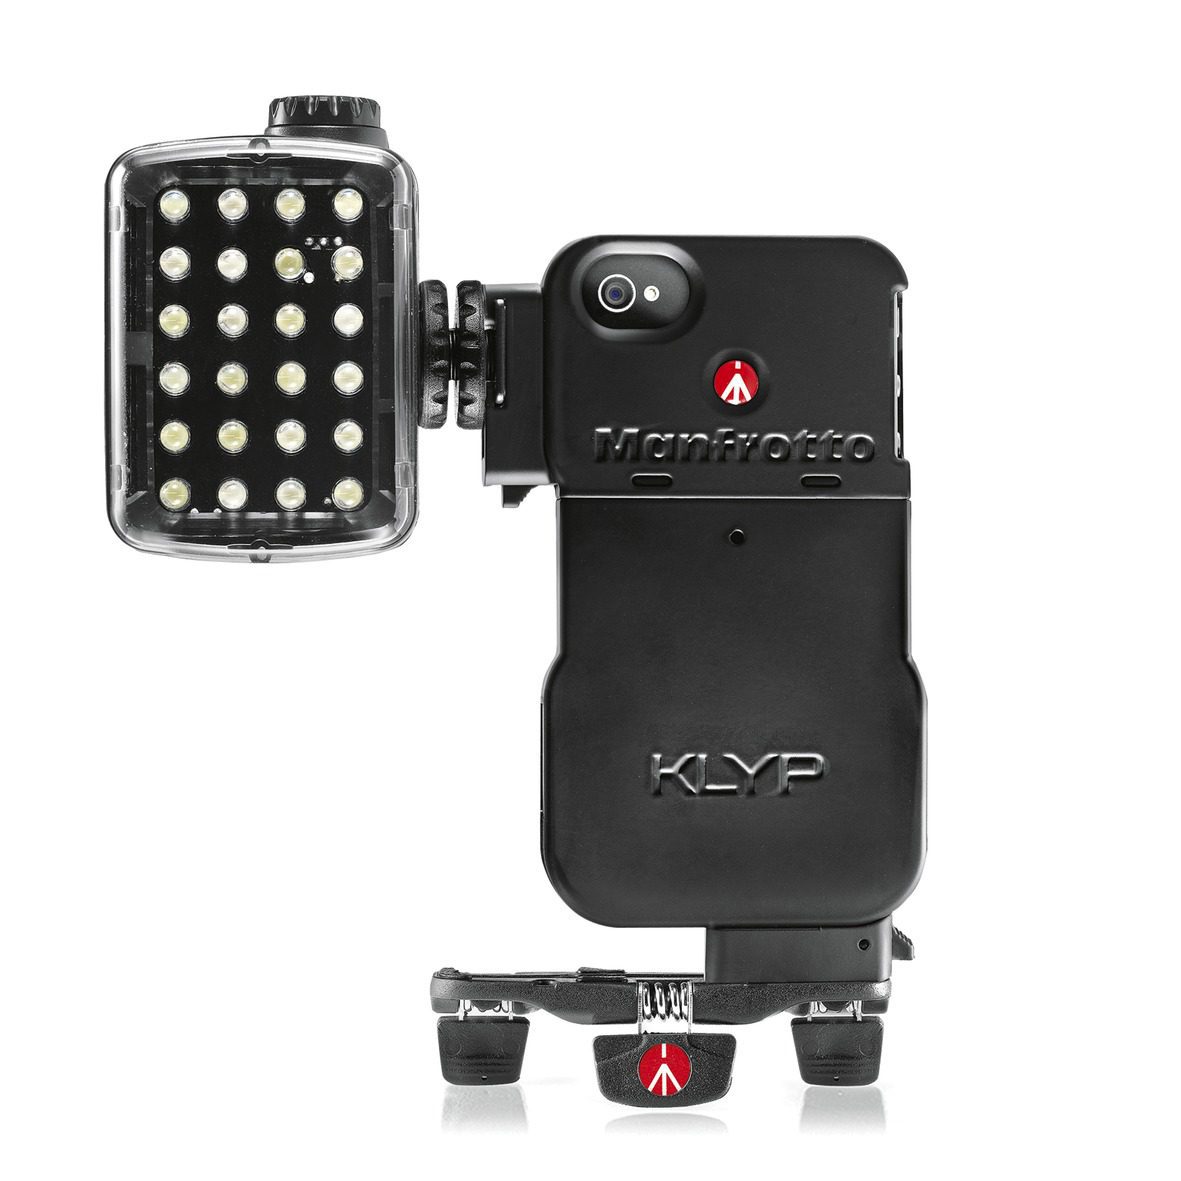 Manfrotto Klyp Case with LED Light and Tripod Attachment